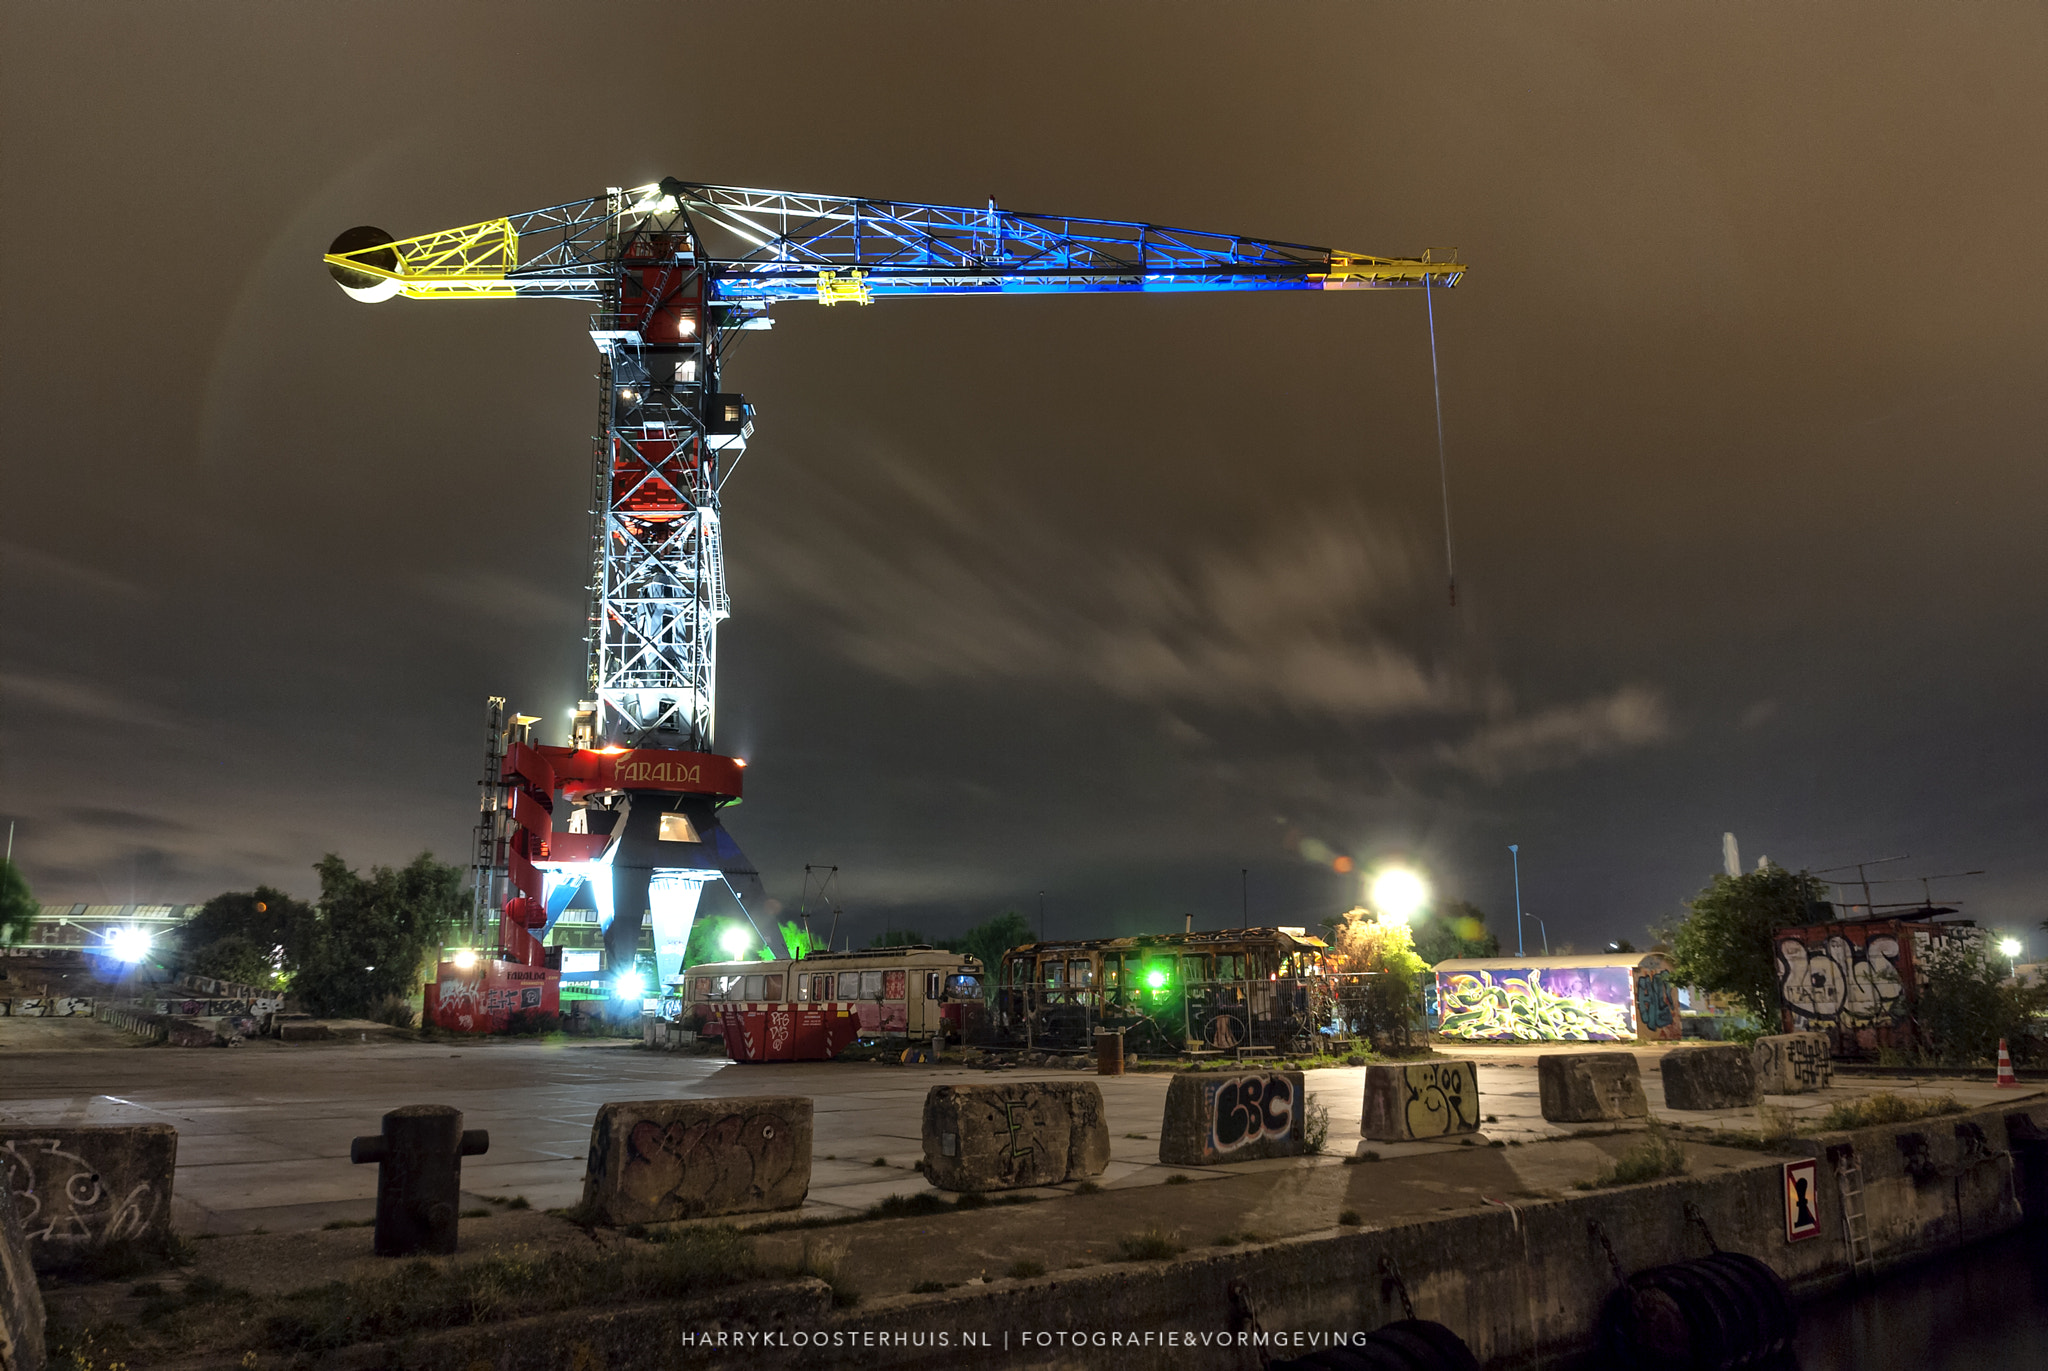 Nikon D80 + Tamron SP AF 17-50mm F2.8 XR Di II VC LD Aspherical (IF) sample photo. A crane to sleep in... photography